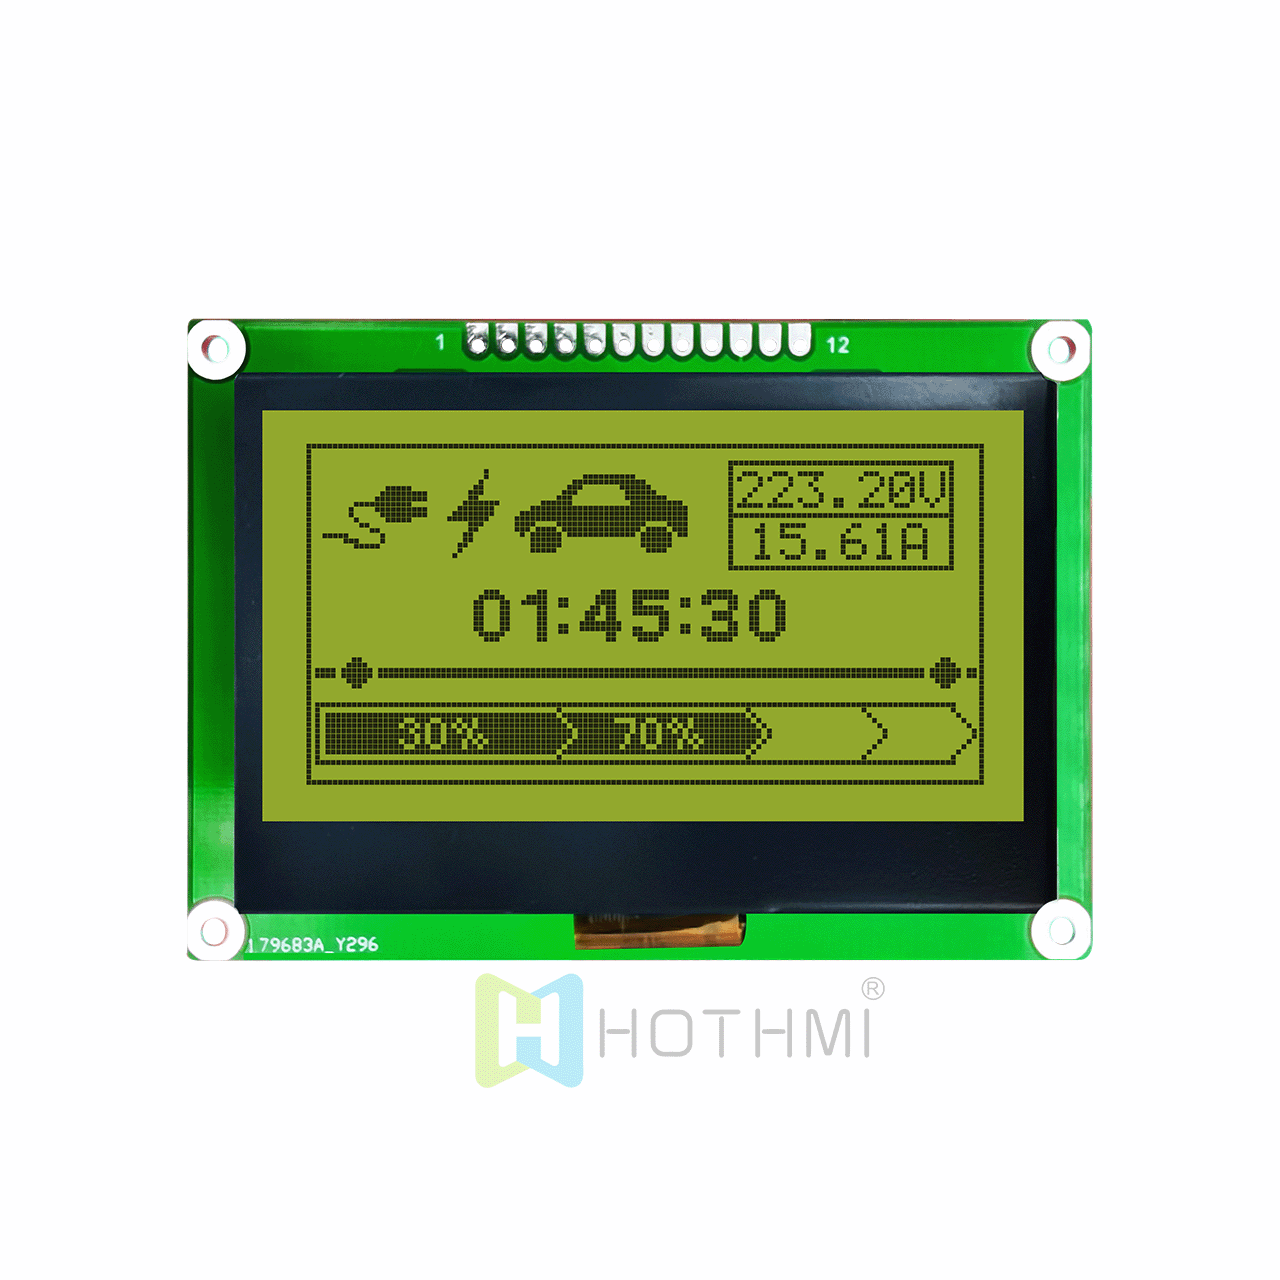 2.7-inch LCD12864 LCD screen/LCM128x64 graphic dot matrix module/yellow-green backlight/with Chinese font library